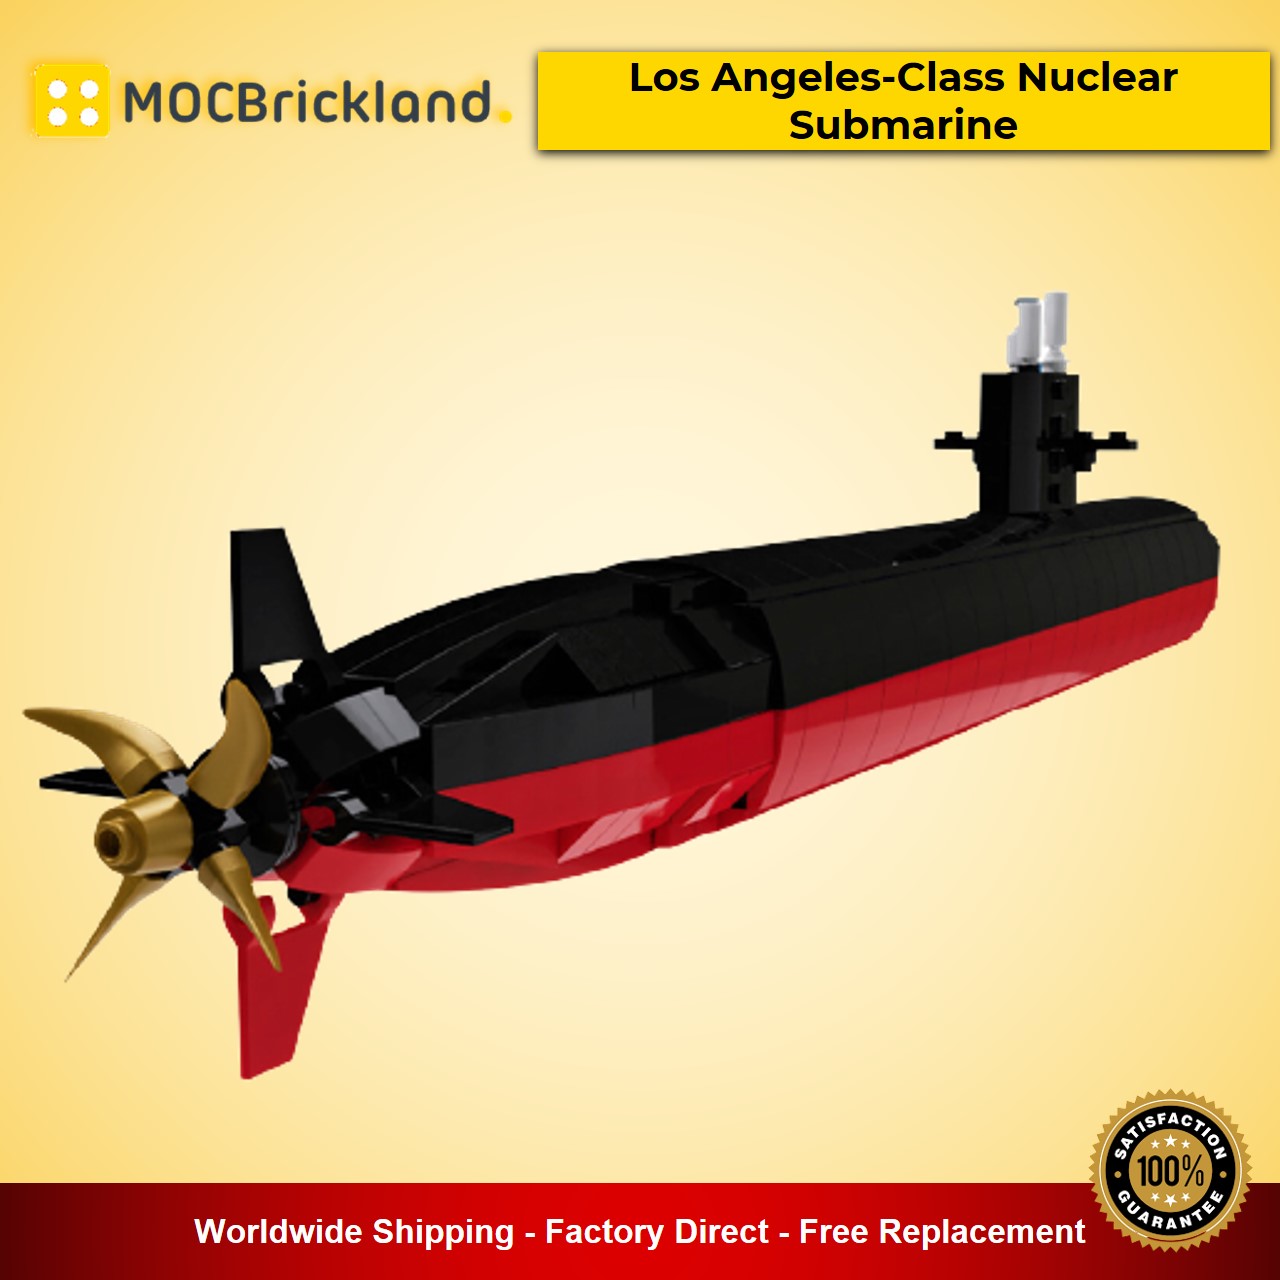 MOCBRICKLAND MOC-61366 Los Angeles-Class Nuclear Submarine